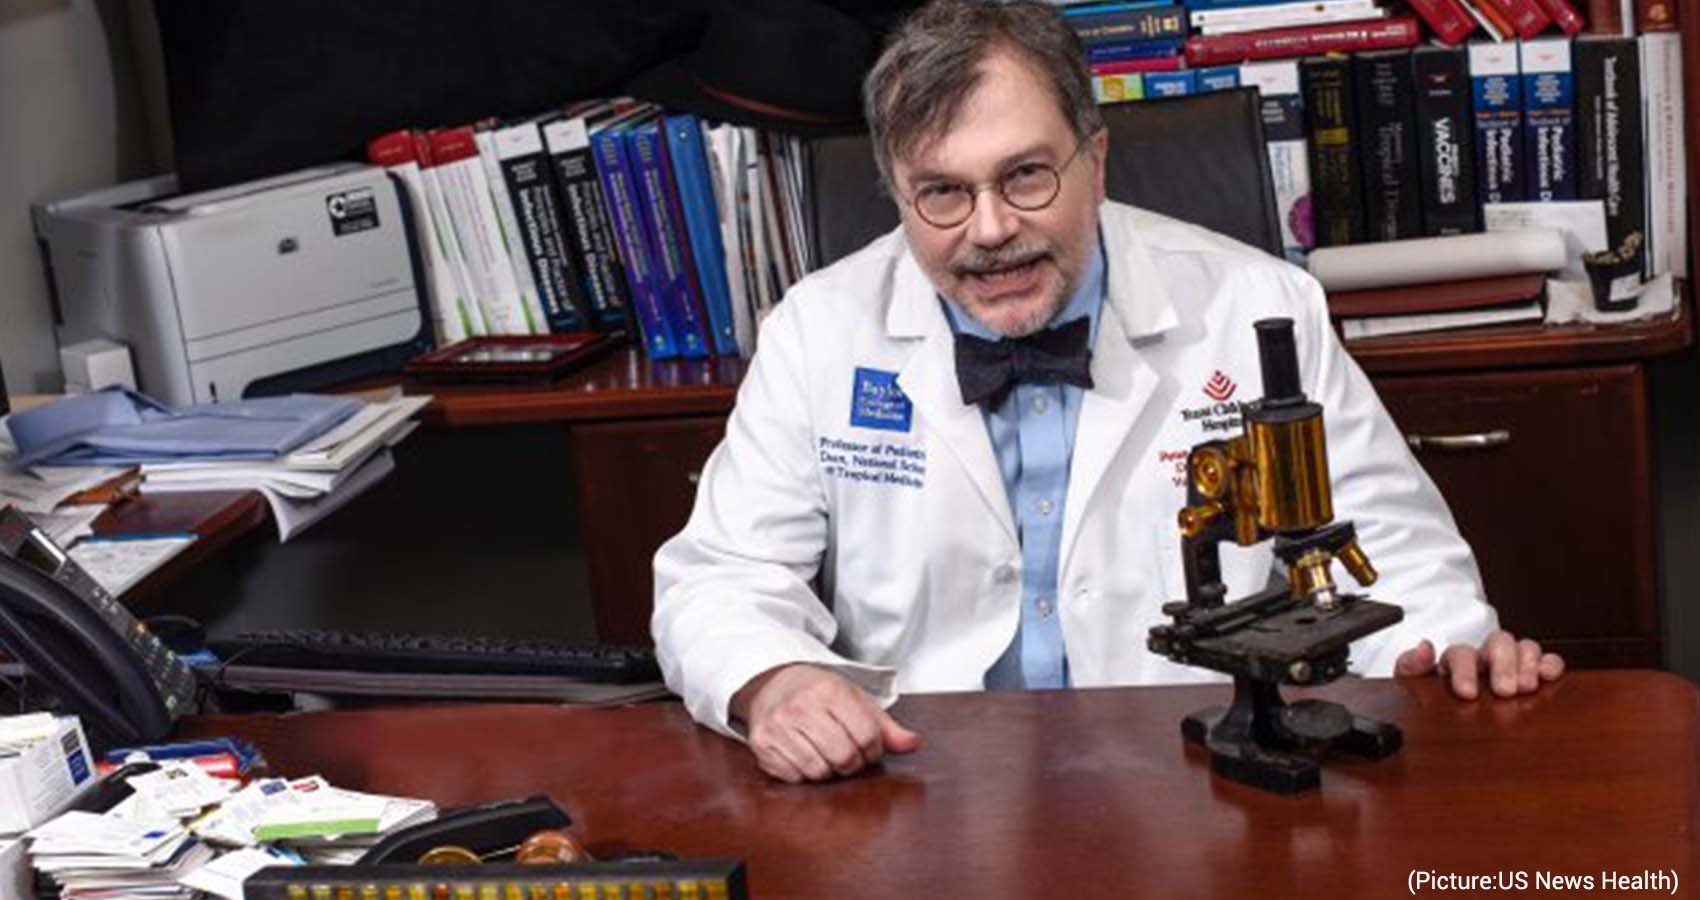 Dr. Peter Jay Hotez, Scientist, Researcher, Author, & Science Explainer To Deliver Keynote Address During AAPI’s 40th Convention In San Antonio, TX